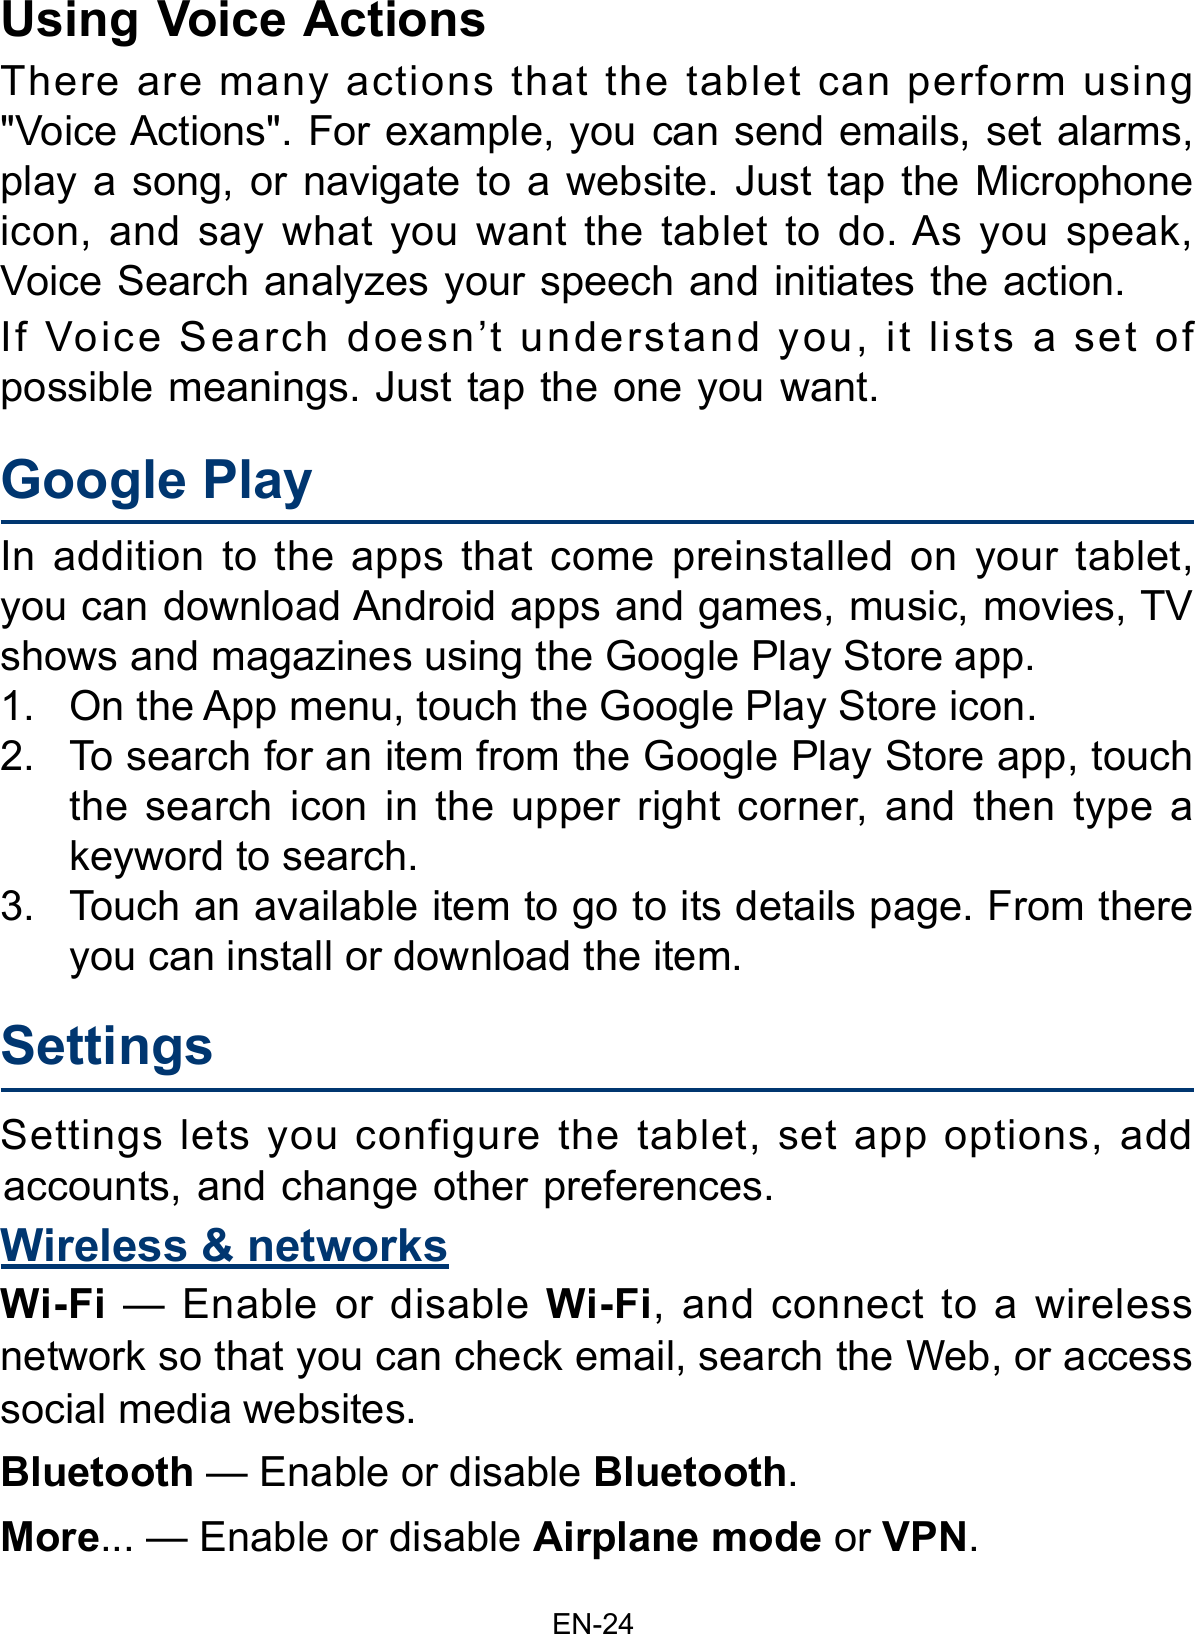 EN-24Google PlayIn addition to the apps that come preinstalled on your tablet, you can download Android apps and games, music, movies, TV shows and magazines using the Google Play Store app. 1. On the App menu, touch the Google Play Store icon.2. To search for an item from the Google Play Store app, touchthe search icon in the upper right corner, and then type akeyword to search.3. Touch an available item to go to its details page. From thereyou can install or download the item.Using Voice ActionsThere are many actions that the tablet can perform using &quot;Voice Actions&quot;. For example, you can send emails, set alarms, play a song, or navigate to a website. Just tap the Microphone icon, and say what you want the tablet to do. As you speak, Voice Search analyzes your speech and initiates the action.If Voice Search doesn’t understand you, it lists a set of possible meanings. Just tap the one you want. Settings Settings lets you configure the tablet, set app options, add accounts, and change other preferences. Wireless &amp; networksWi-Fi  — Enable or disable Wi-Fi, and connect to a wireless network so that you can check email, search the Web, or access social media websites.Bluetooth — Enable or disable Bluetooth.More... — Enable or disable Airplane mode or VPN. 